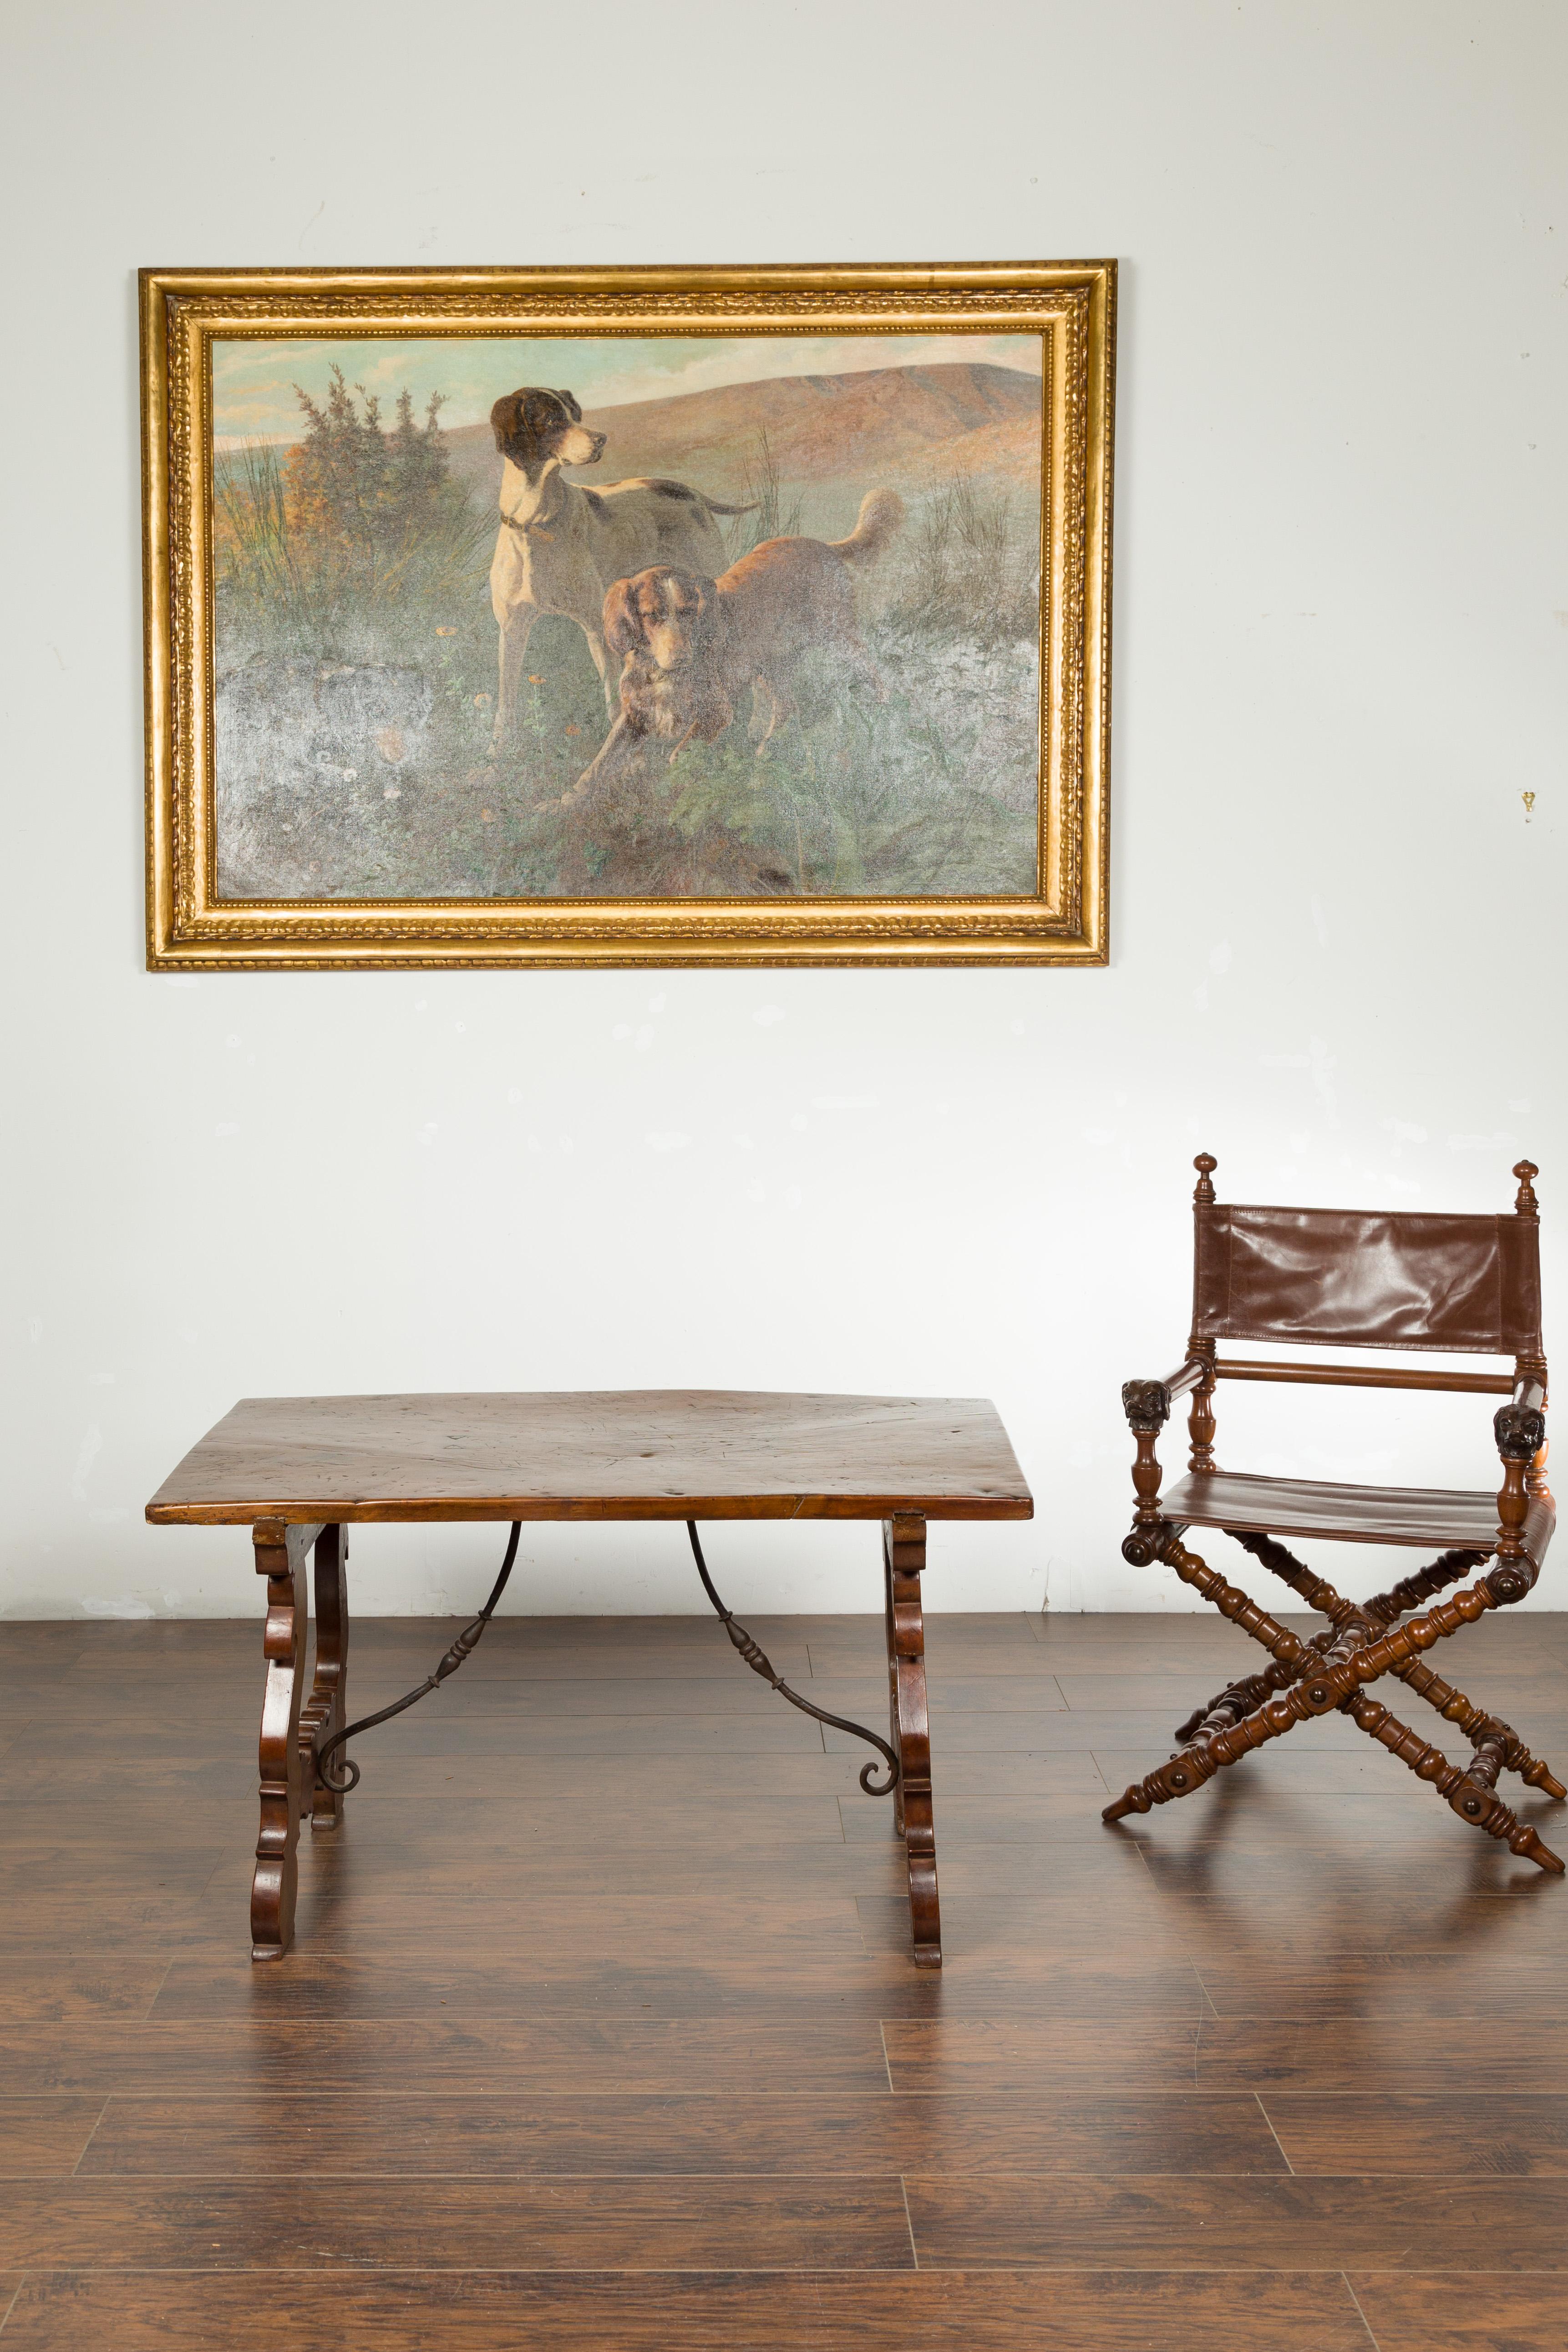 An Italian low fratino walnut table from the early 19th century, with wrought iron stretchers. Created in Italy during the first quarter of the 19th century, this walnut table features a single plank top with nice wear, sitting above a lyre shaped